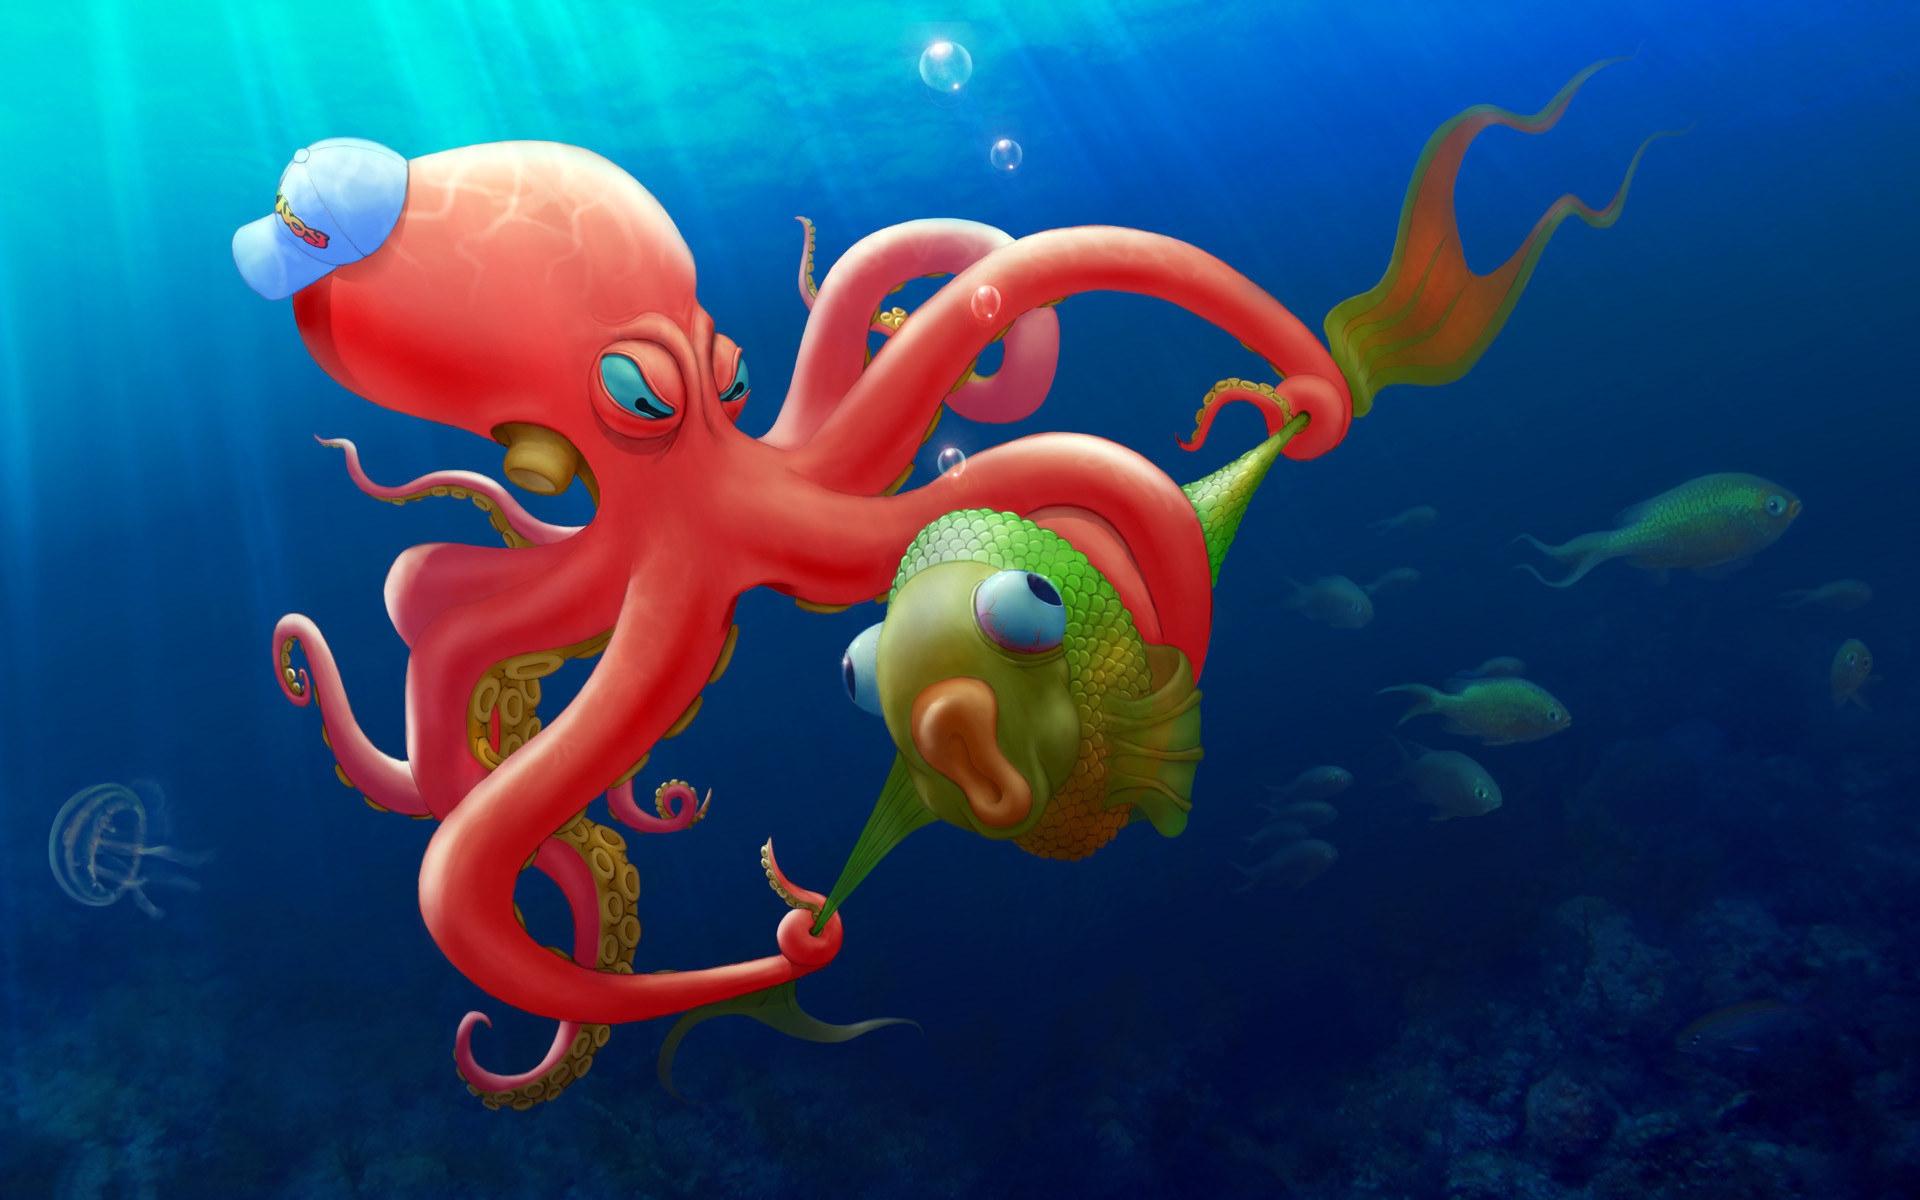 Wallpaper.wiki Red Octopus Art Background PIC WPD001524